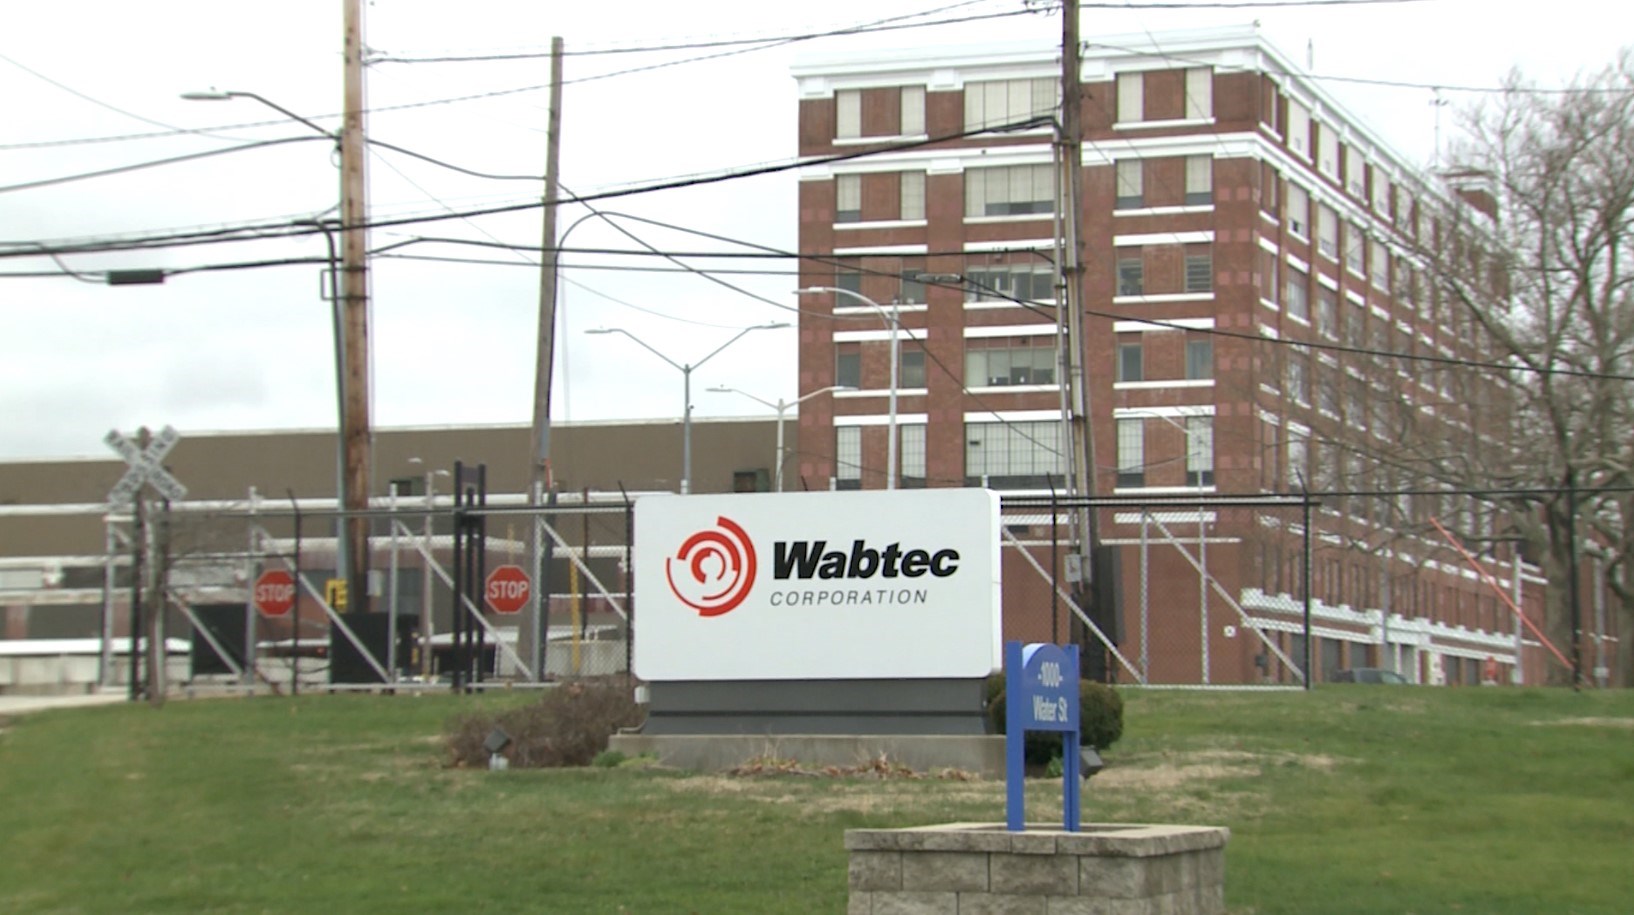 Union Shares Details of Proposed Contract with Wabtec Workers